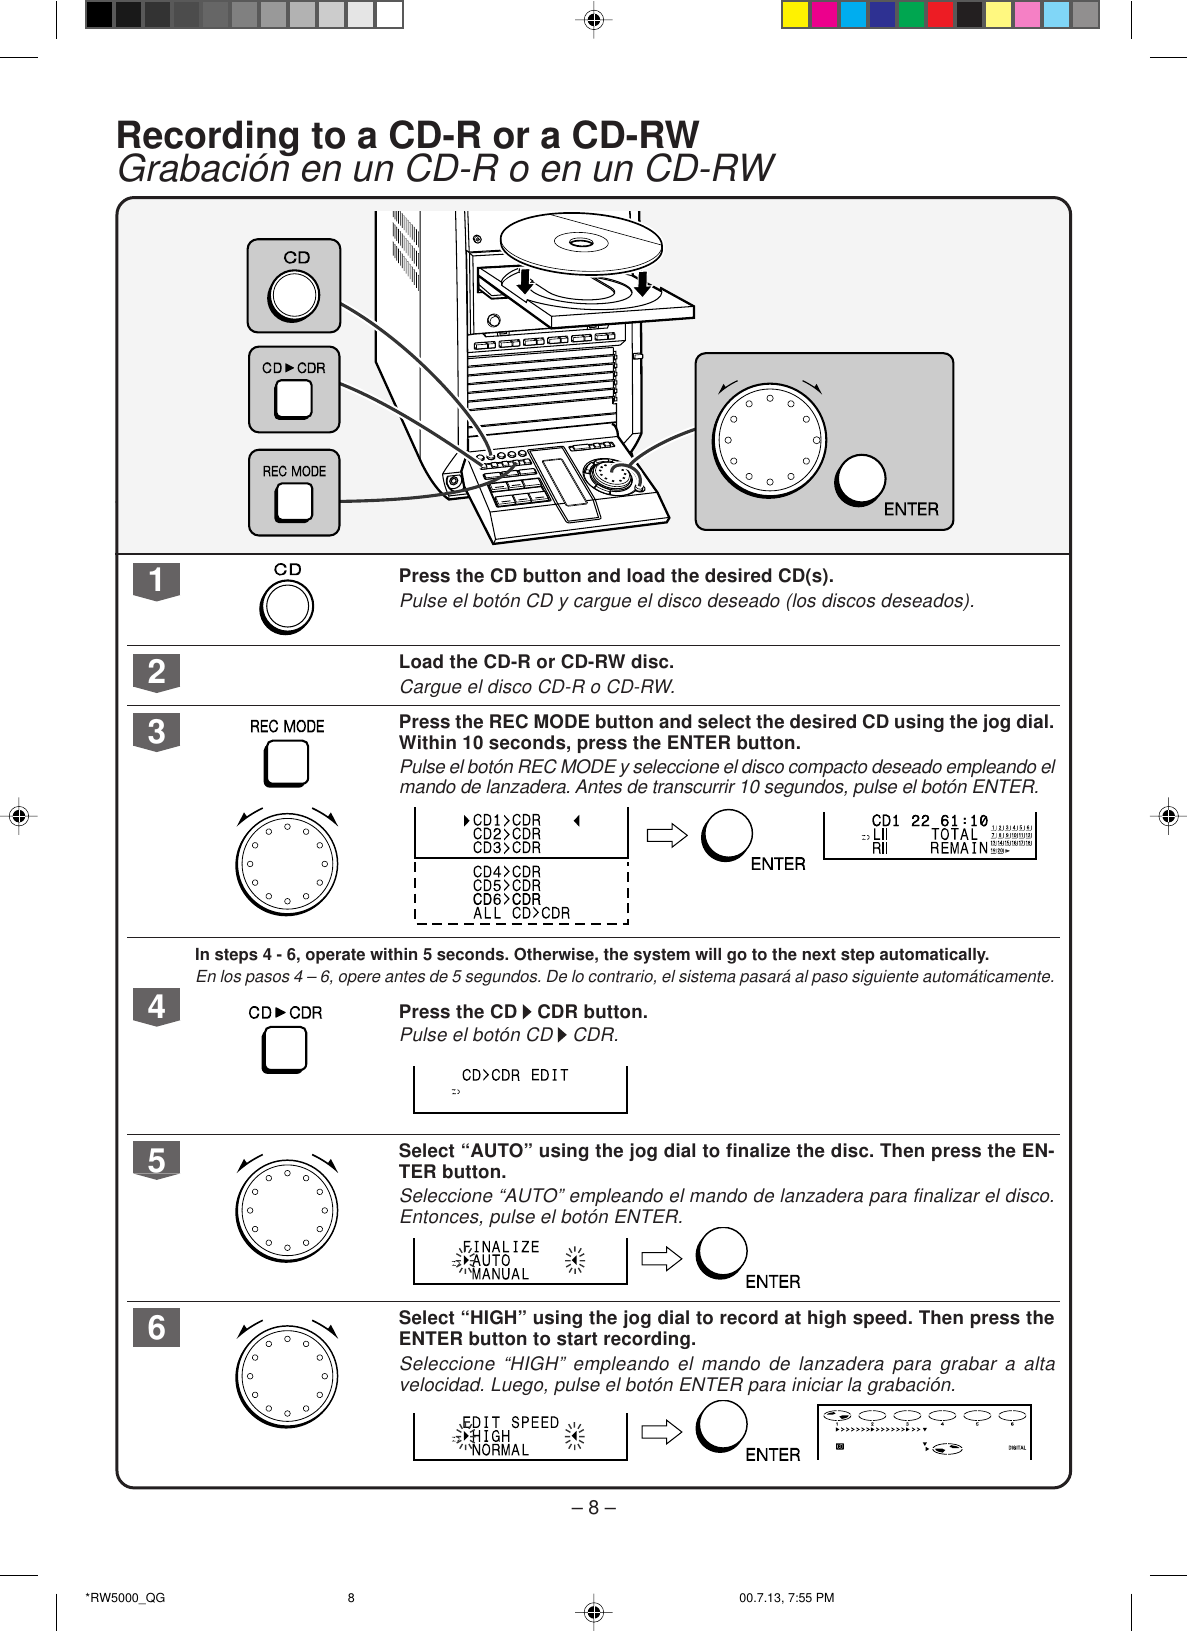 Page 8 of 8 - Sharp Cdrw5000-Quick-Guide CD-RW5000 Quick Start Guide